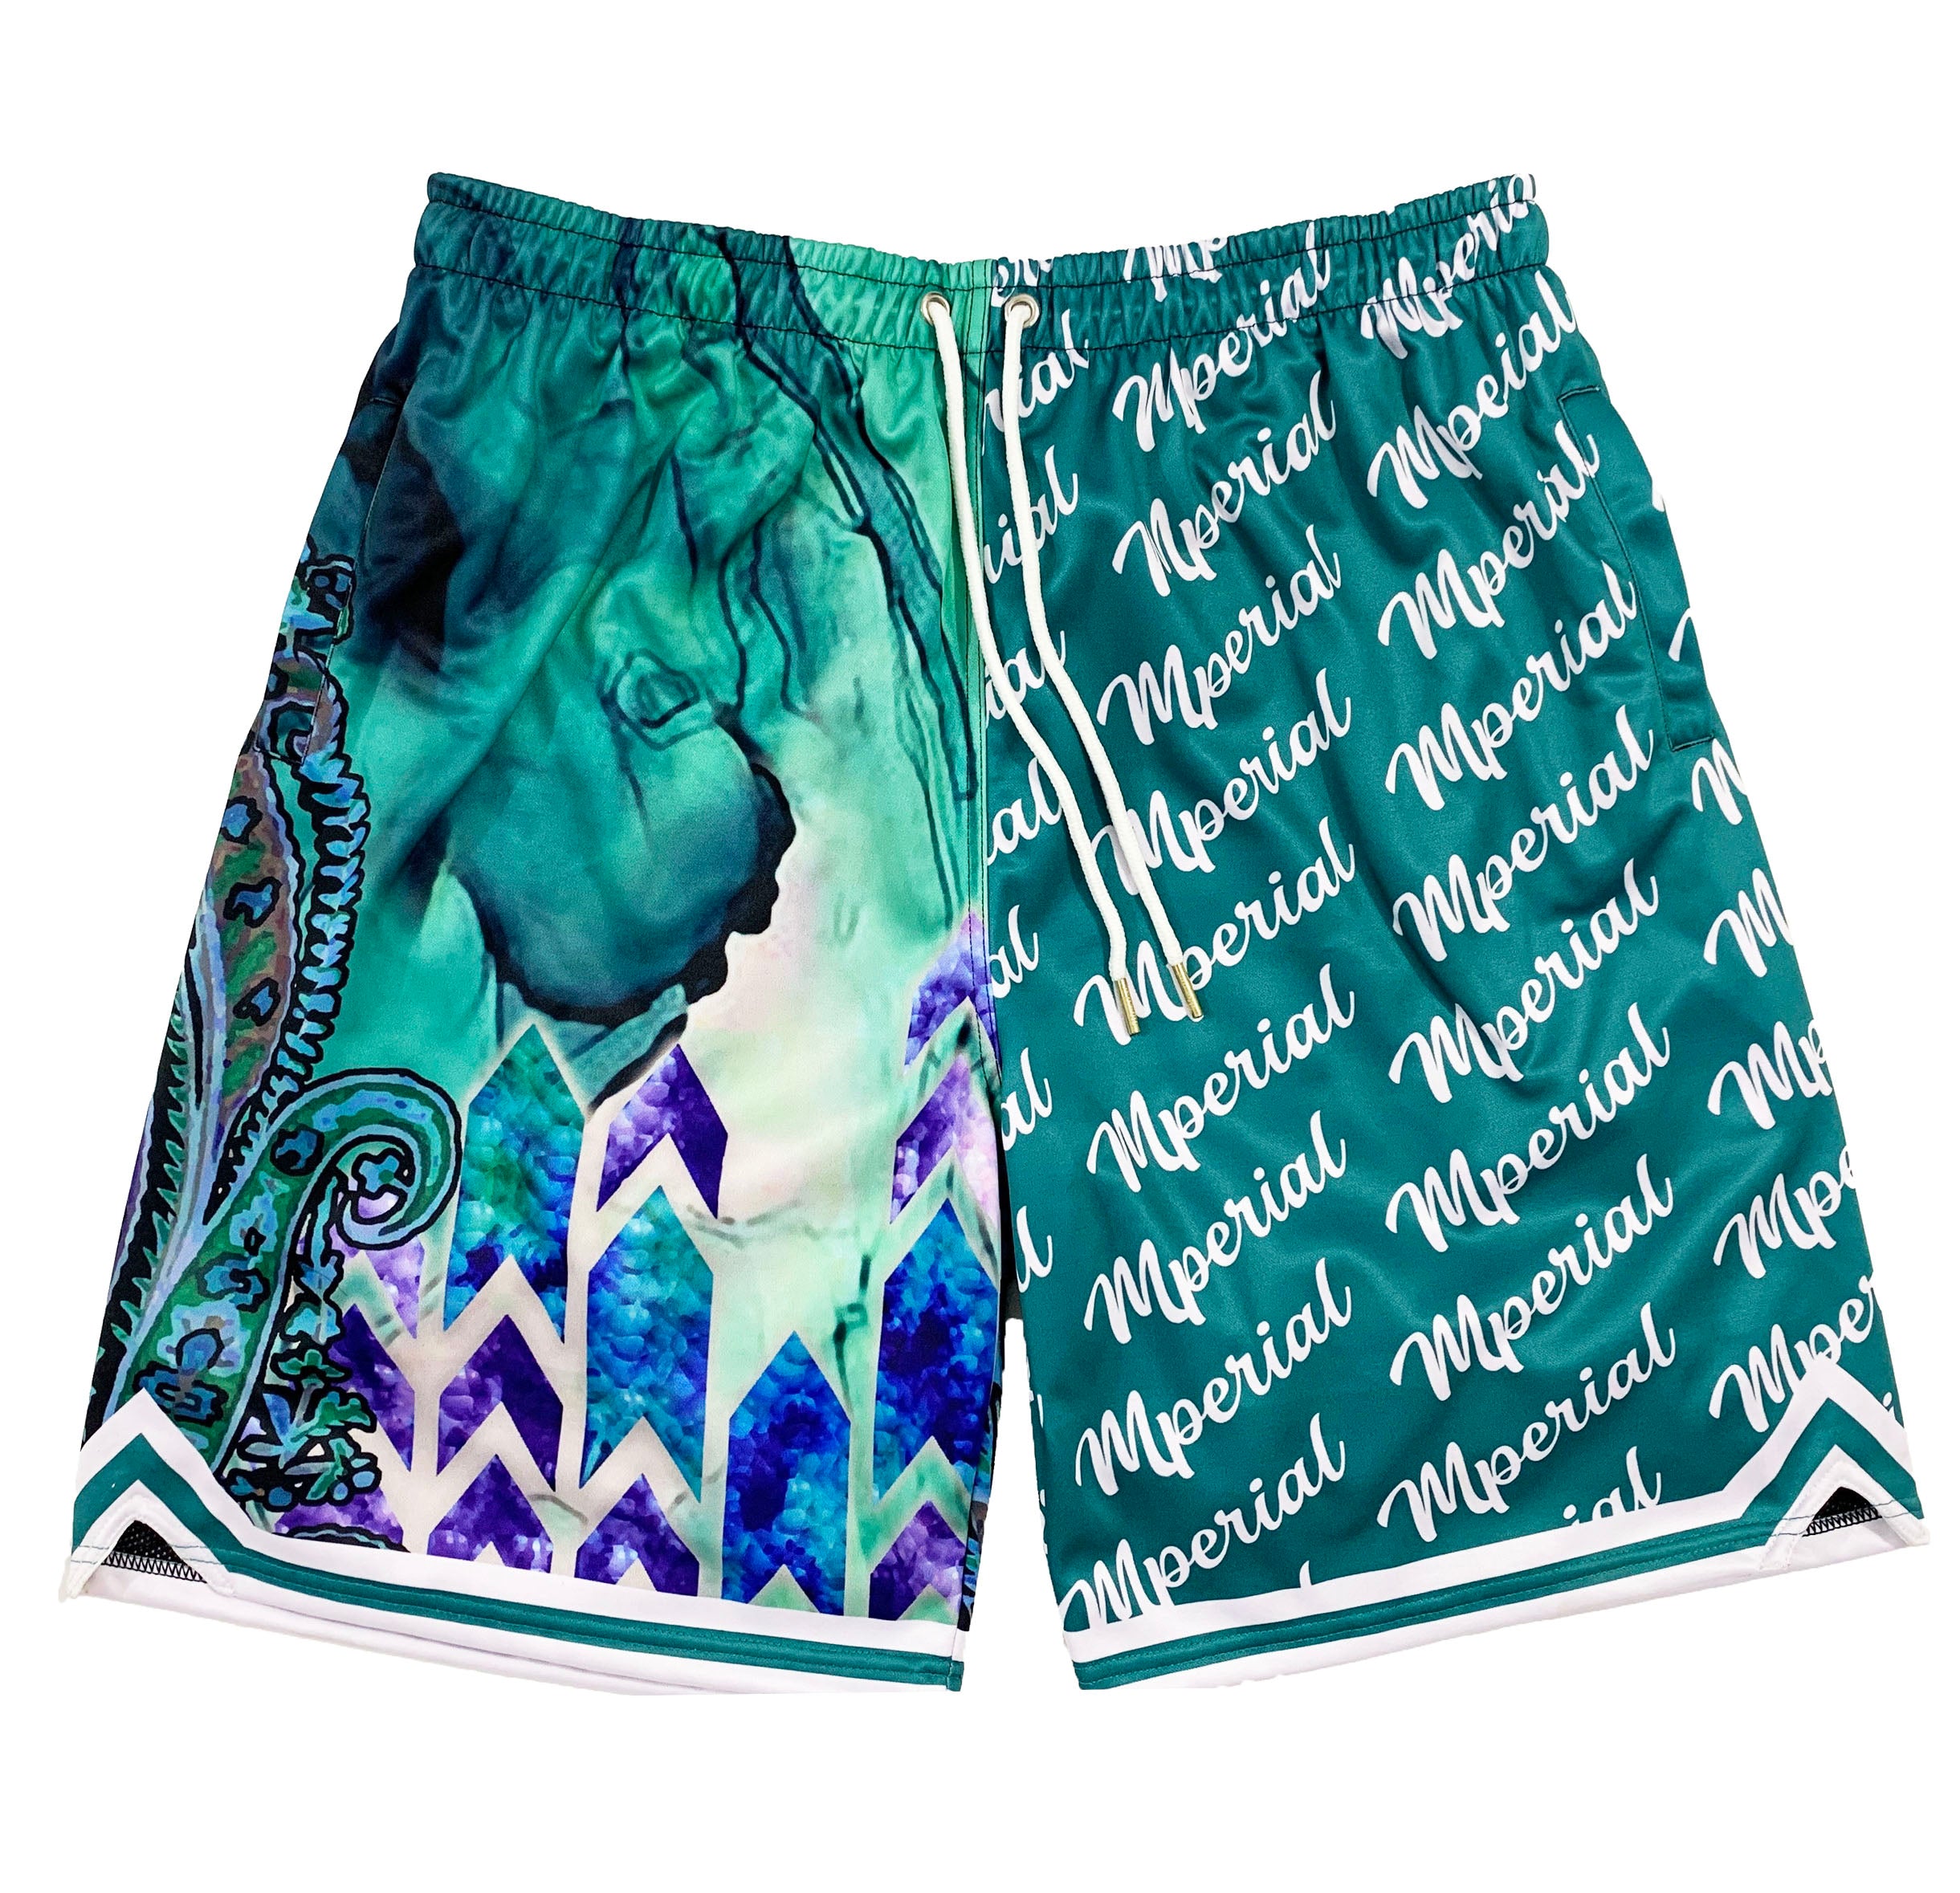 Concept Teal Shorts